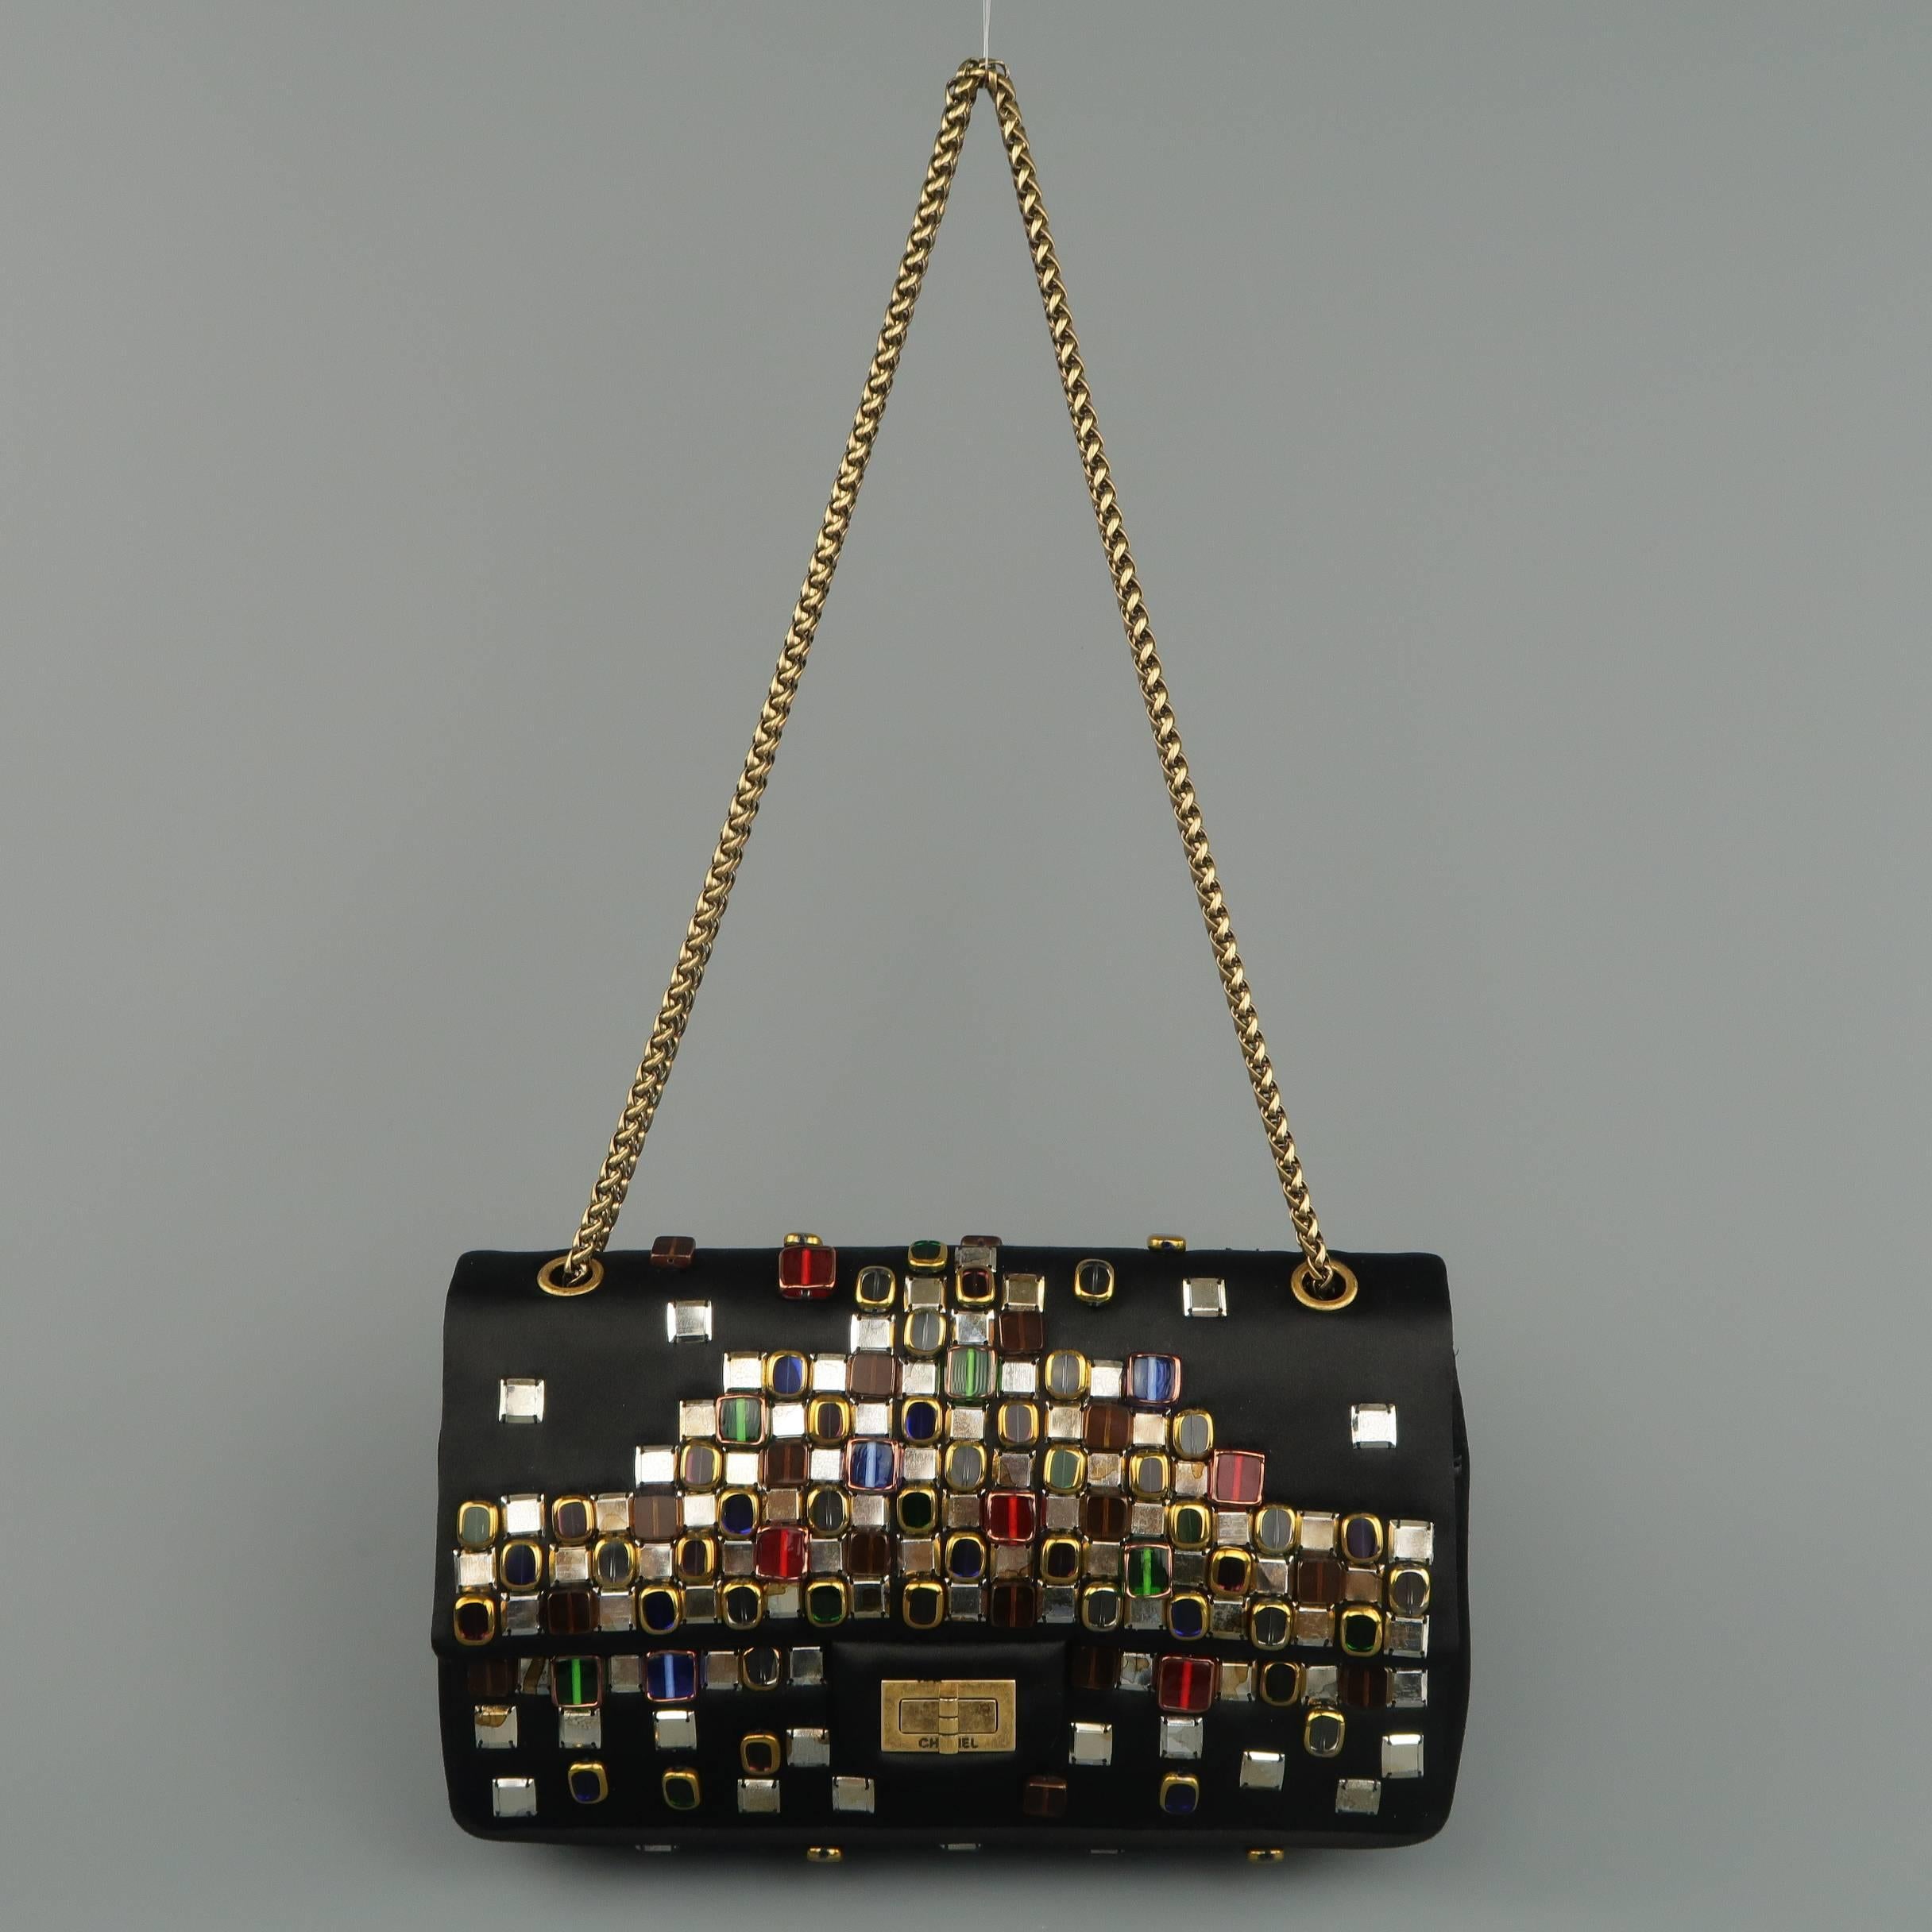 Rare CHANEL Pre-Fall 2011 Collection Byzantine Reissue shoulder bag comes in black silk satin and features gold and silver tone with various gemstone beaded studs, antiqued gold tone hardware, double chain strap, and internal pockets. Made in